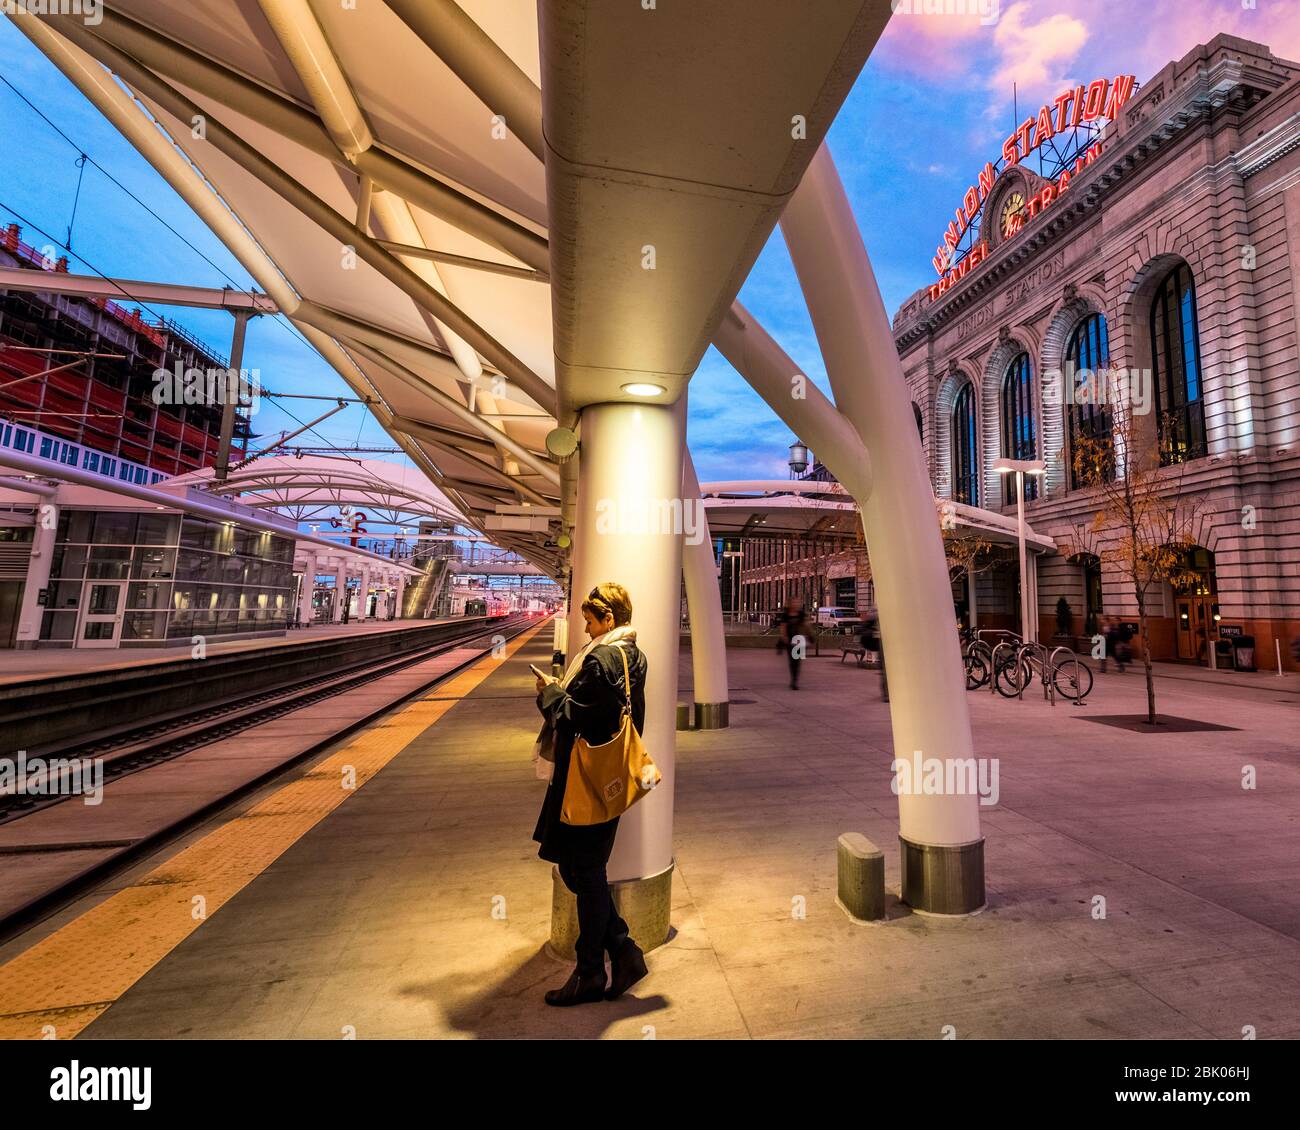 A commuter checks her phone while waithing for a light rail train at Union Station, Denver, Colorado, USA. Stock Photo